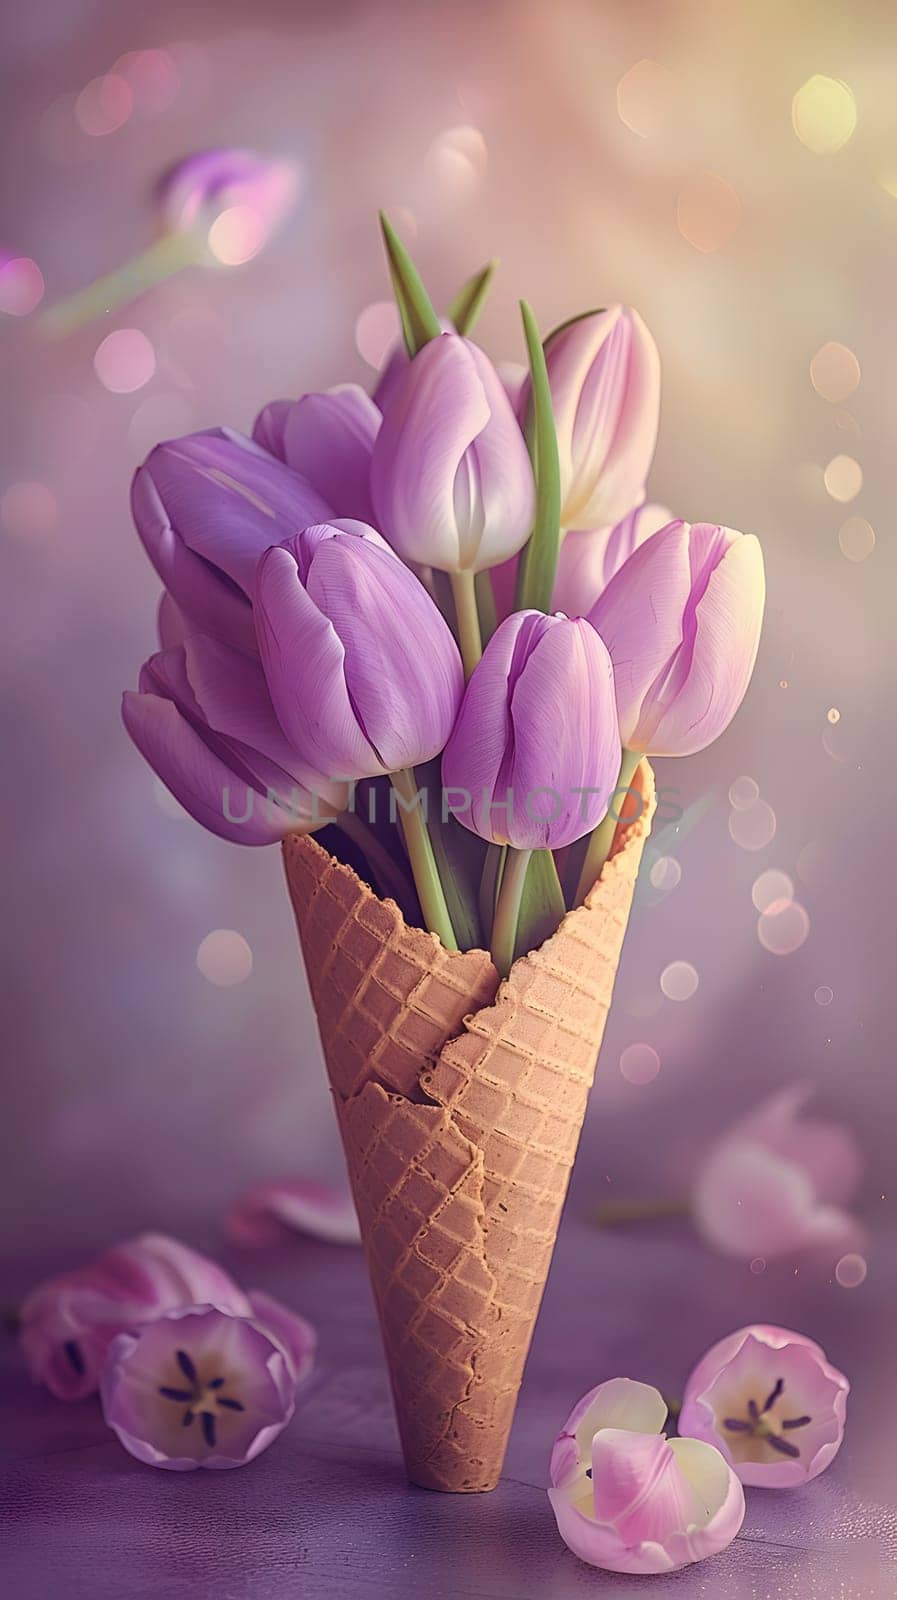 A stunning arrangement of purple tulips placed in an ice cream cone, creating a unique and eyecatching still life photography subject